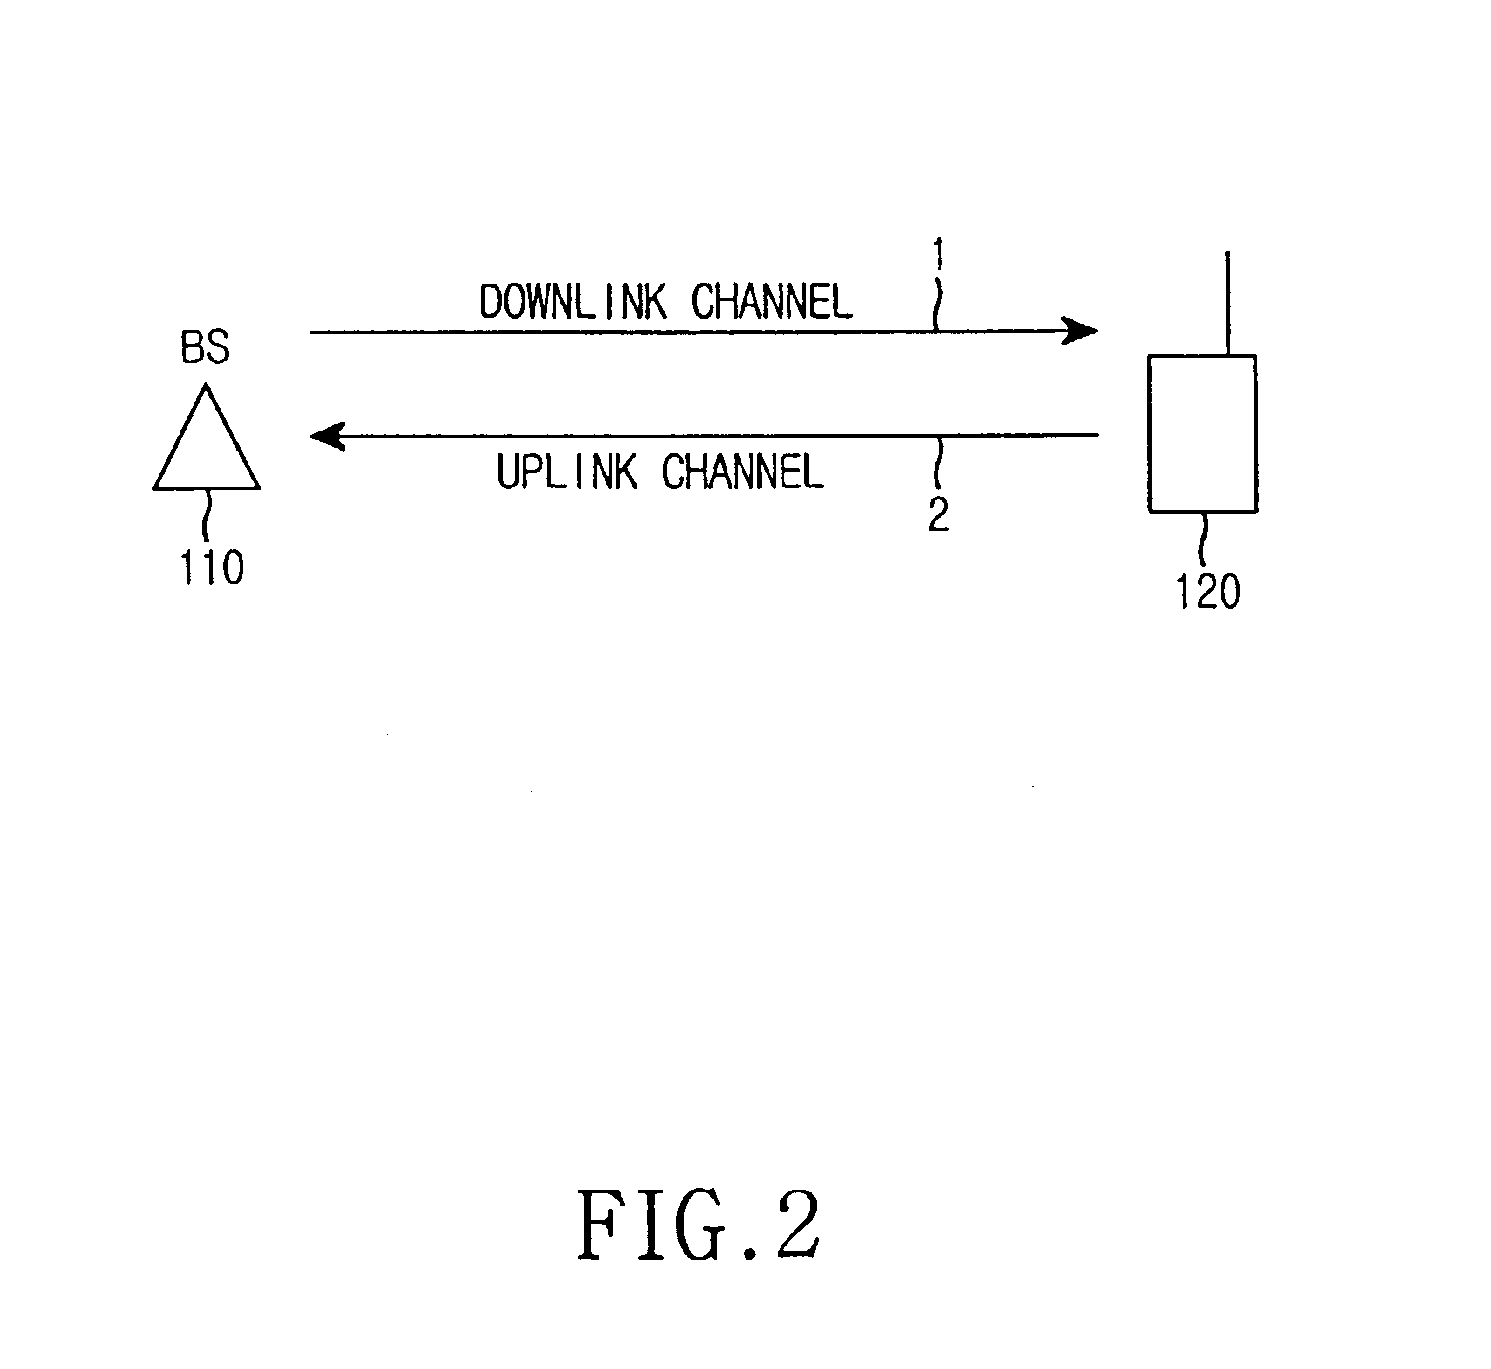 Method and apparatus for providing commercial broadcasting service in cellular mobile communication network